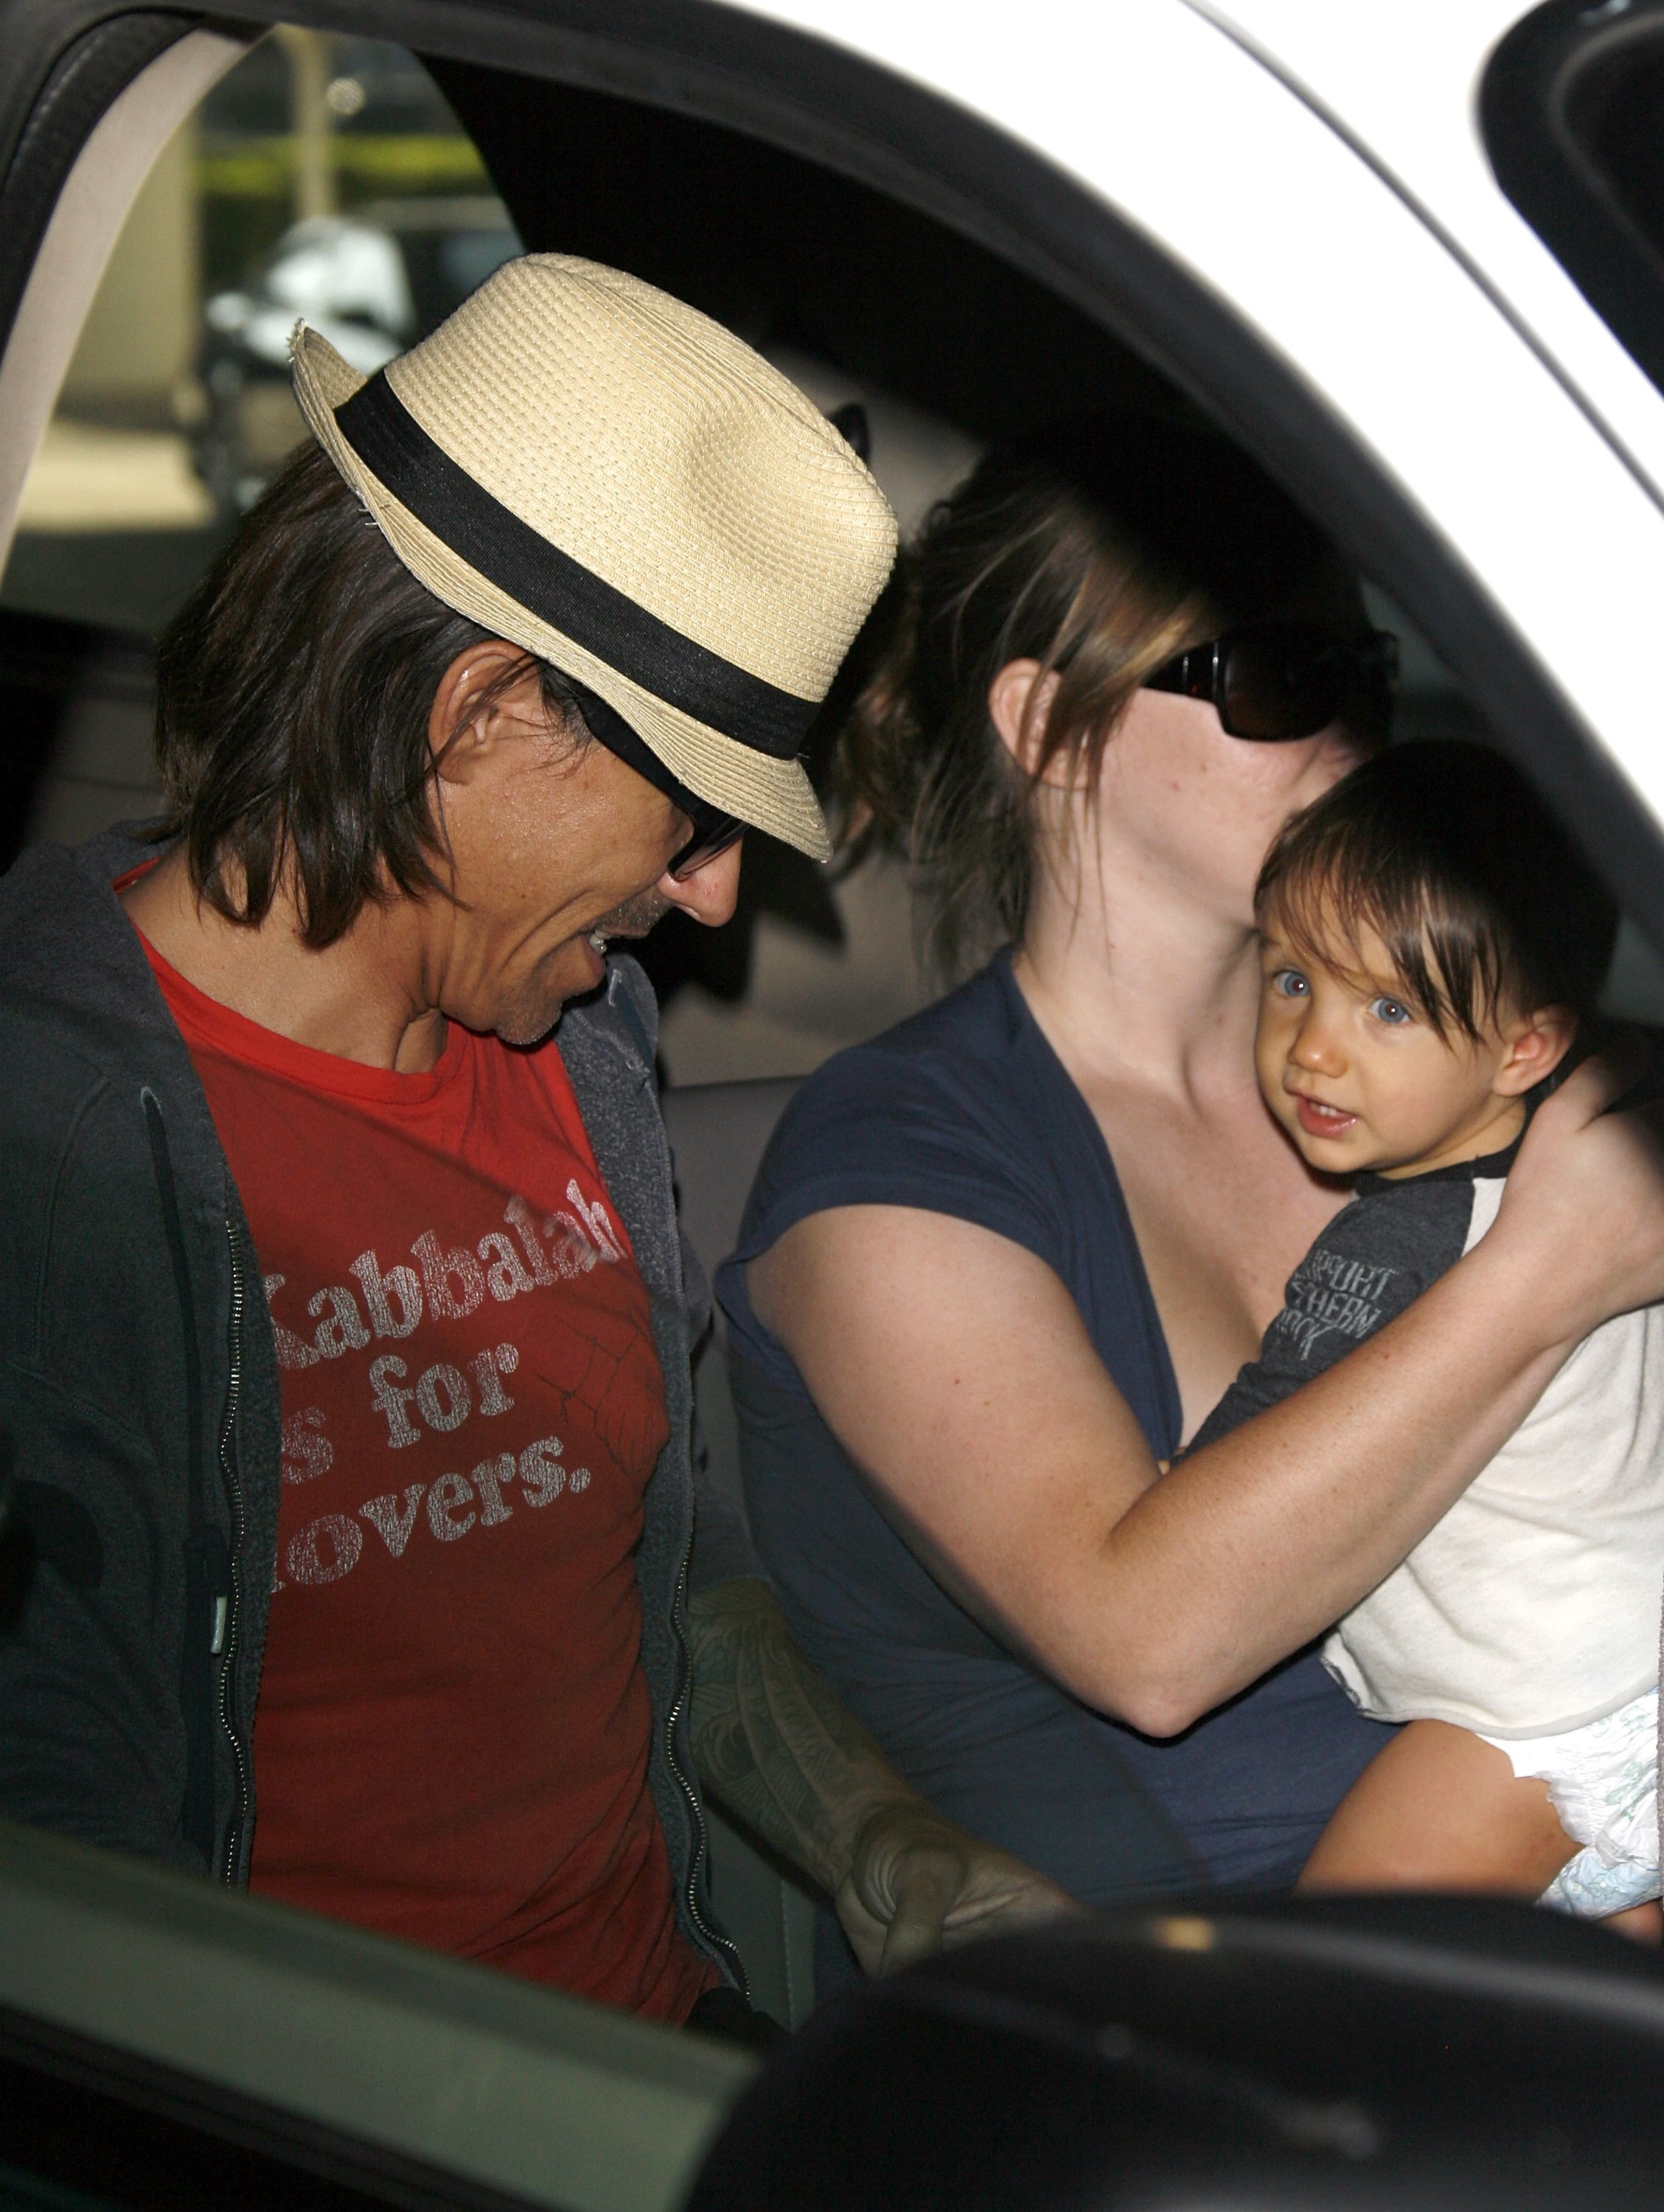 Singer Anthony Kiedis and son, Everly Bear Kiedis at LAX Airport on July 20, 2008 in Los Ageles, California. | Source: Getty Images